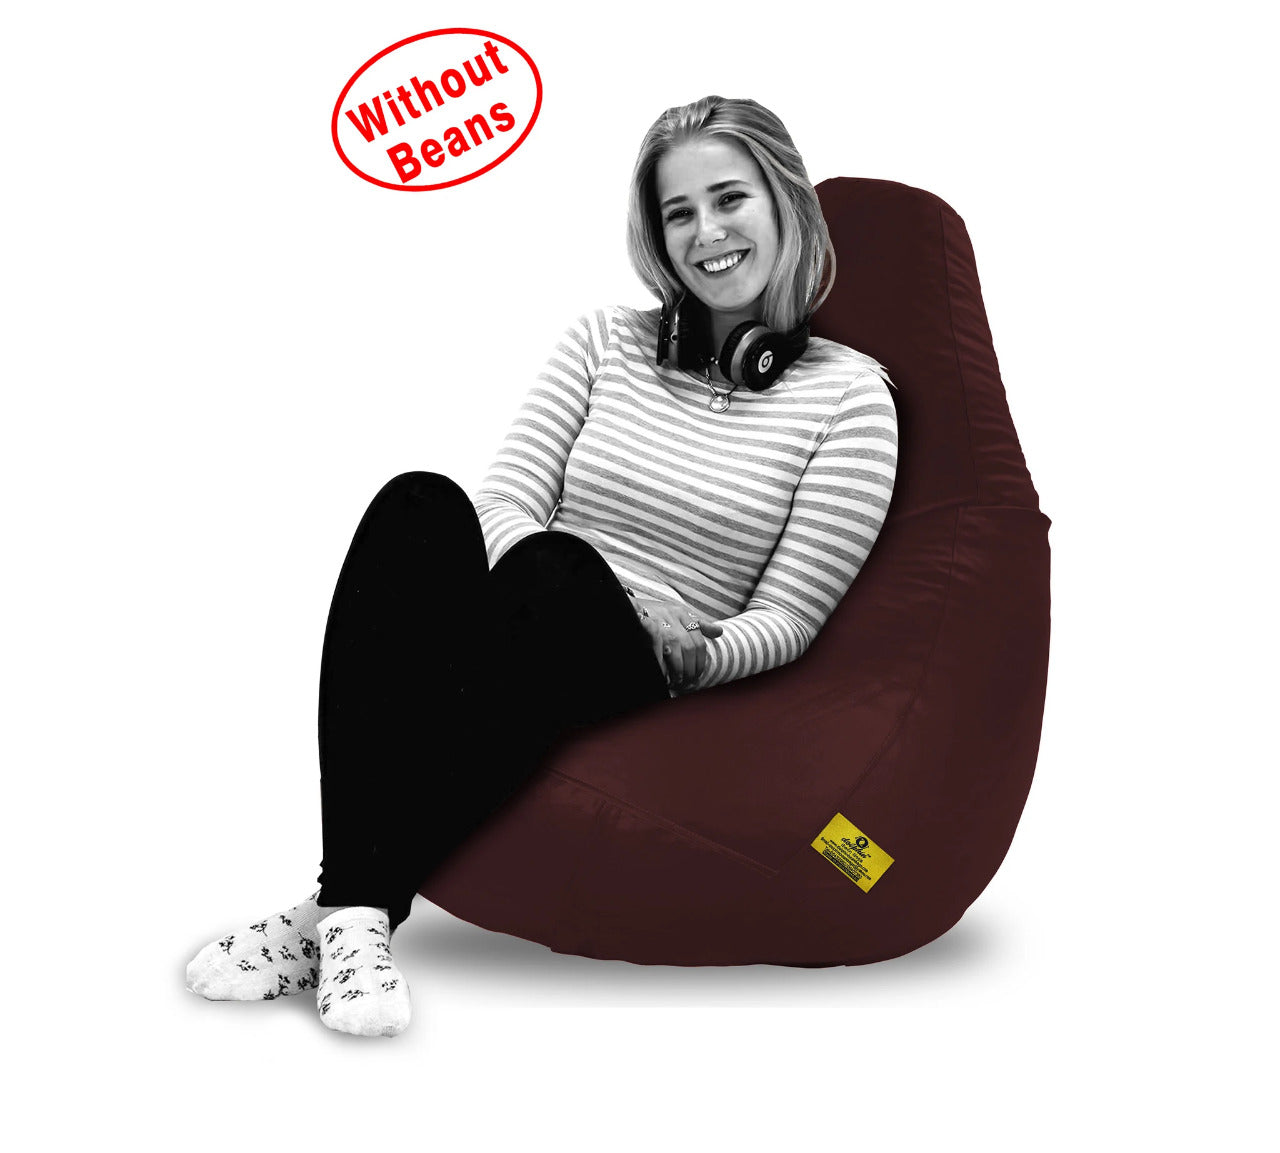 BEAN BAG : BROWN (Without Beans)